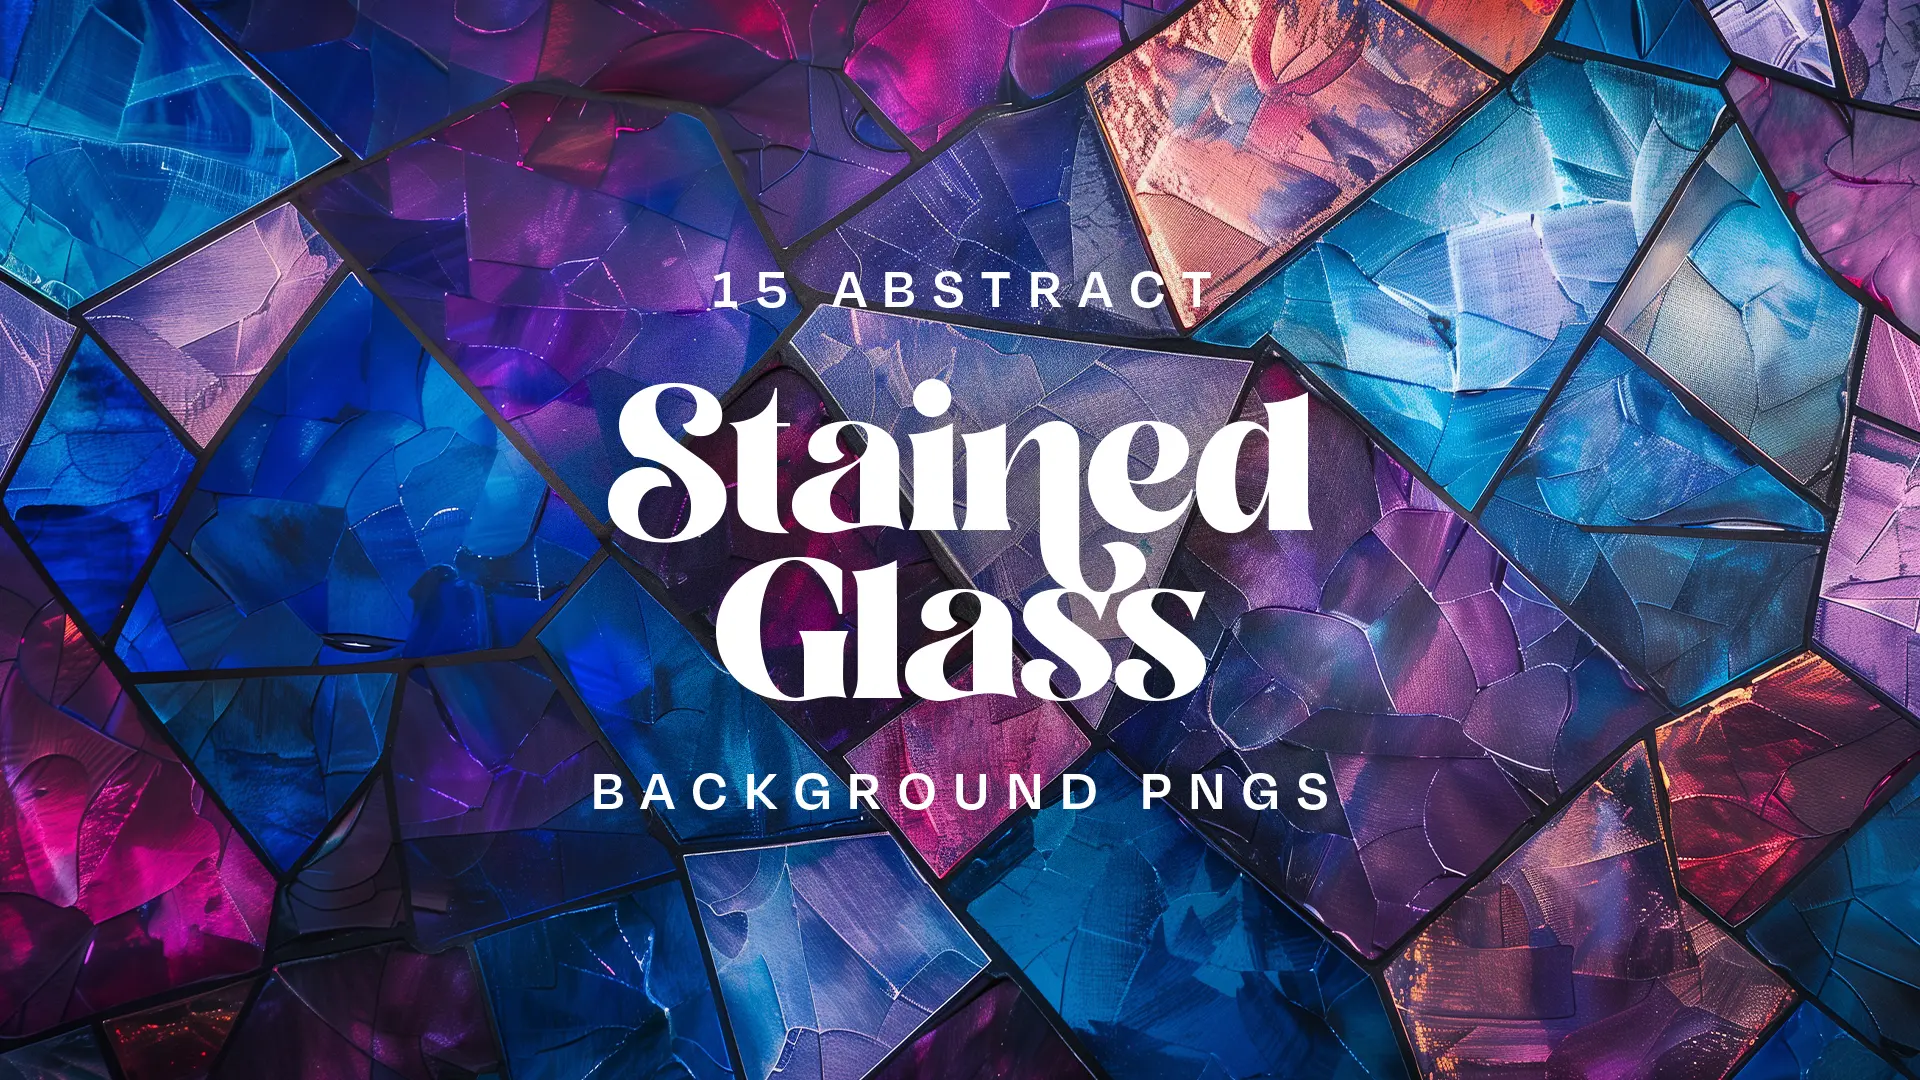 Enhance Your Church'S Visual Experience With Our &Quot;Stained Glass&Quot; Background Collection, Featuring 15 Abstract Pngs That Will Add Vibrant Color And Inspiration To Your Worship Environment.